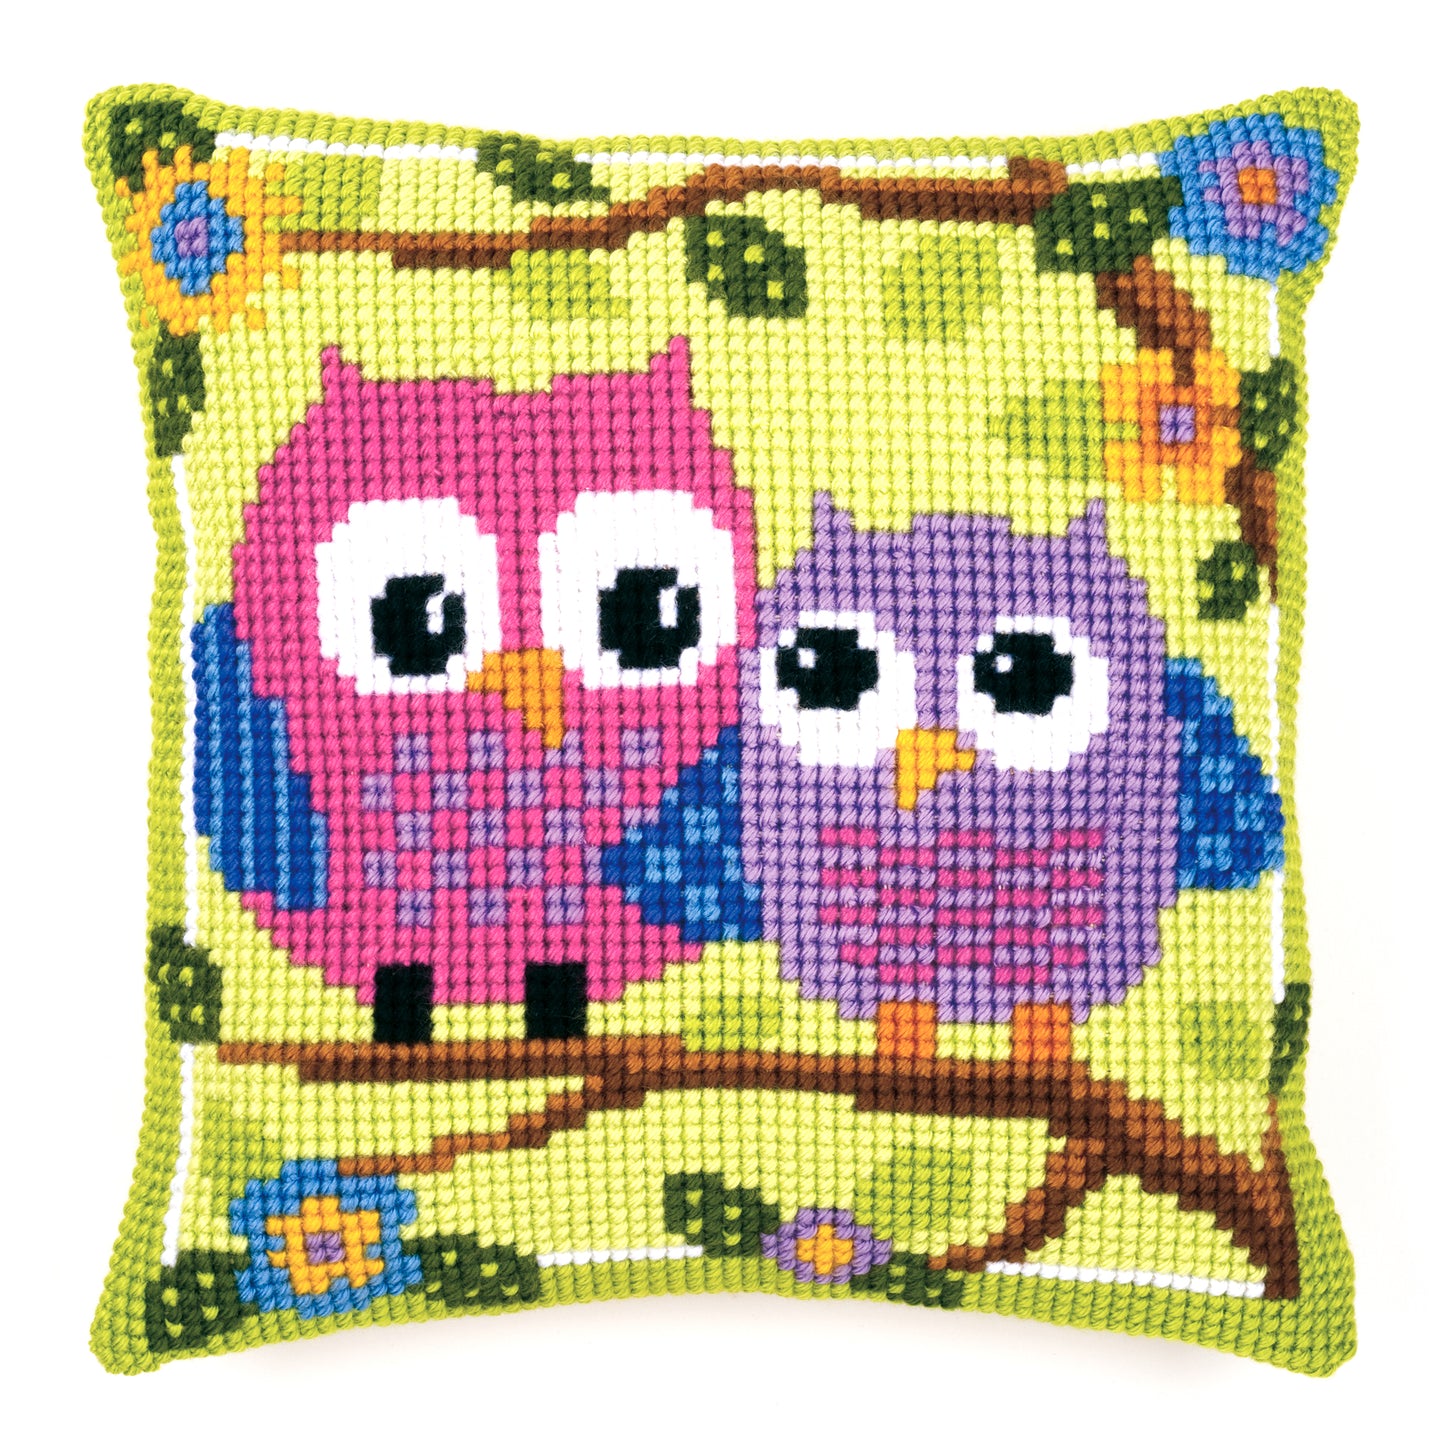 Owls in a Tree Large Holed Cross Stitch Cushion Kit by Vervaco